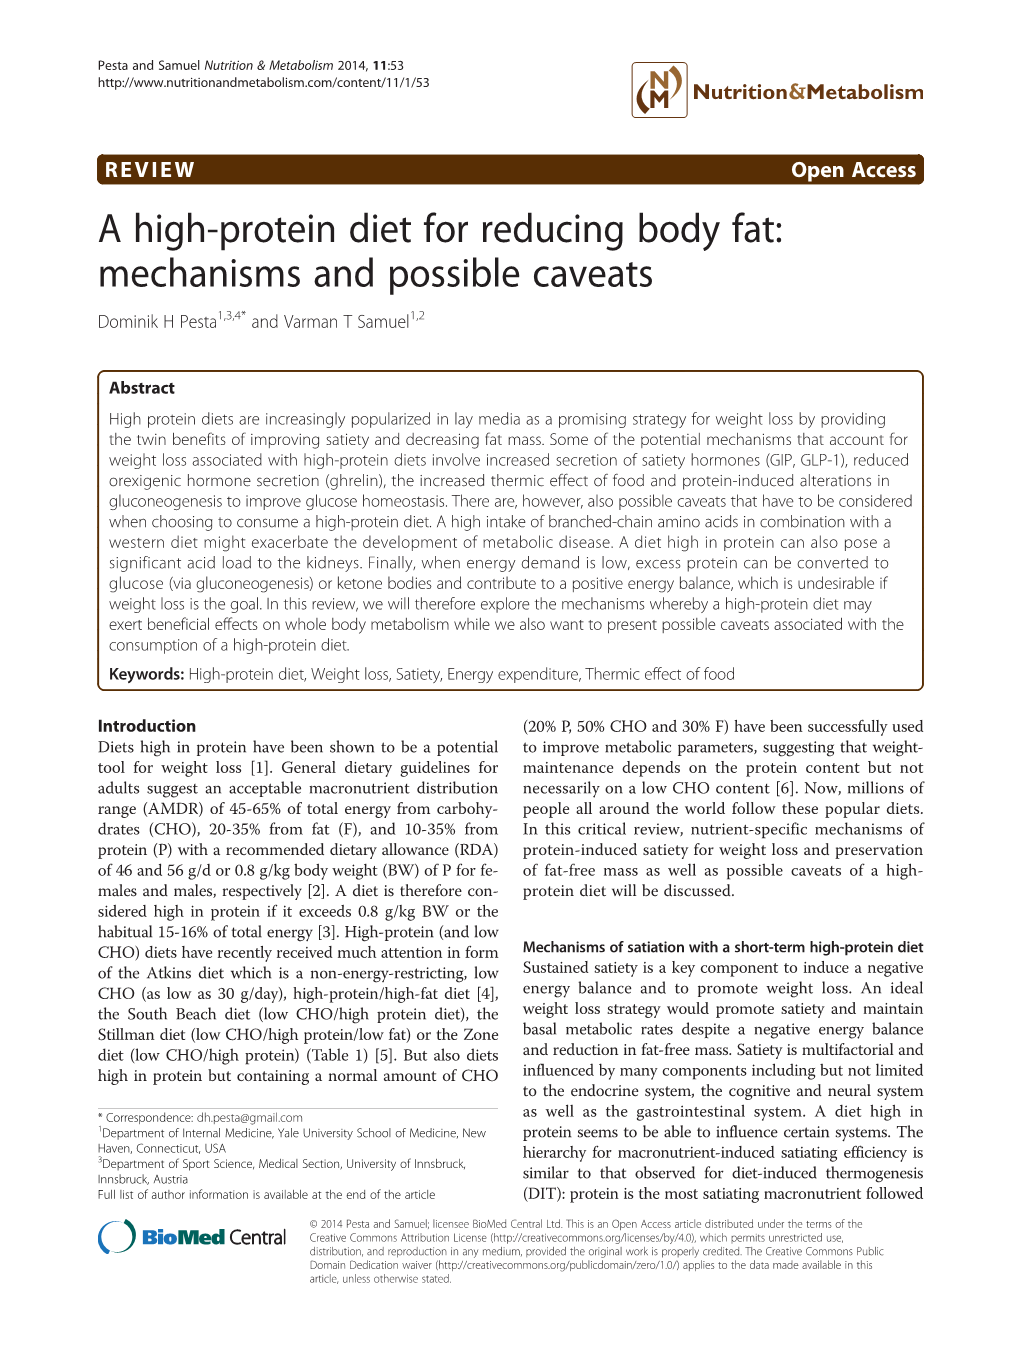 A High-Protein Diet for Reducing Body Fat: Mechanisms and Possible Caveats Dominik H Pesta1,3,4* and Varman T Samuel1,2